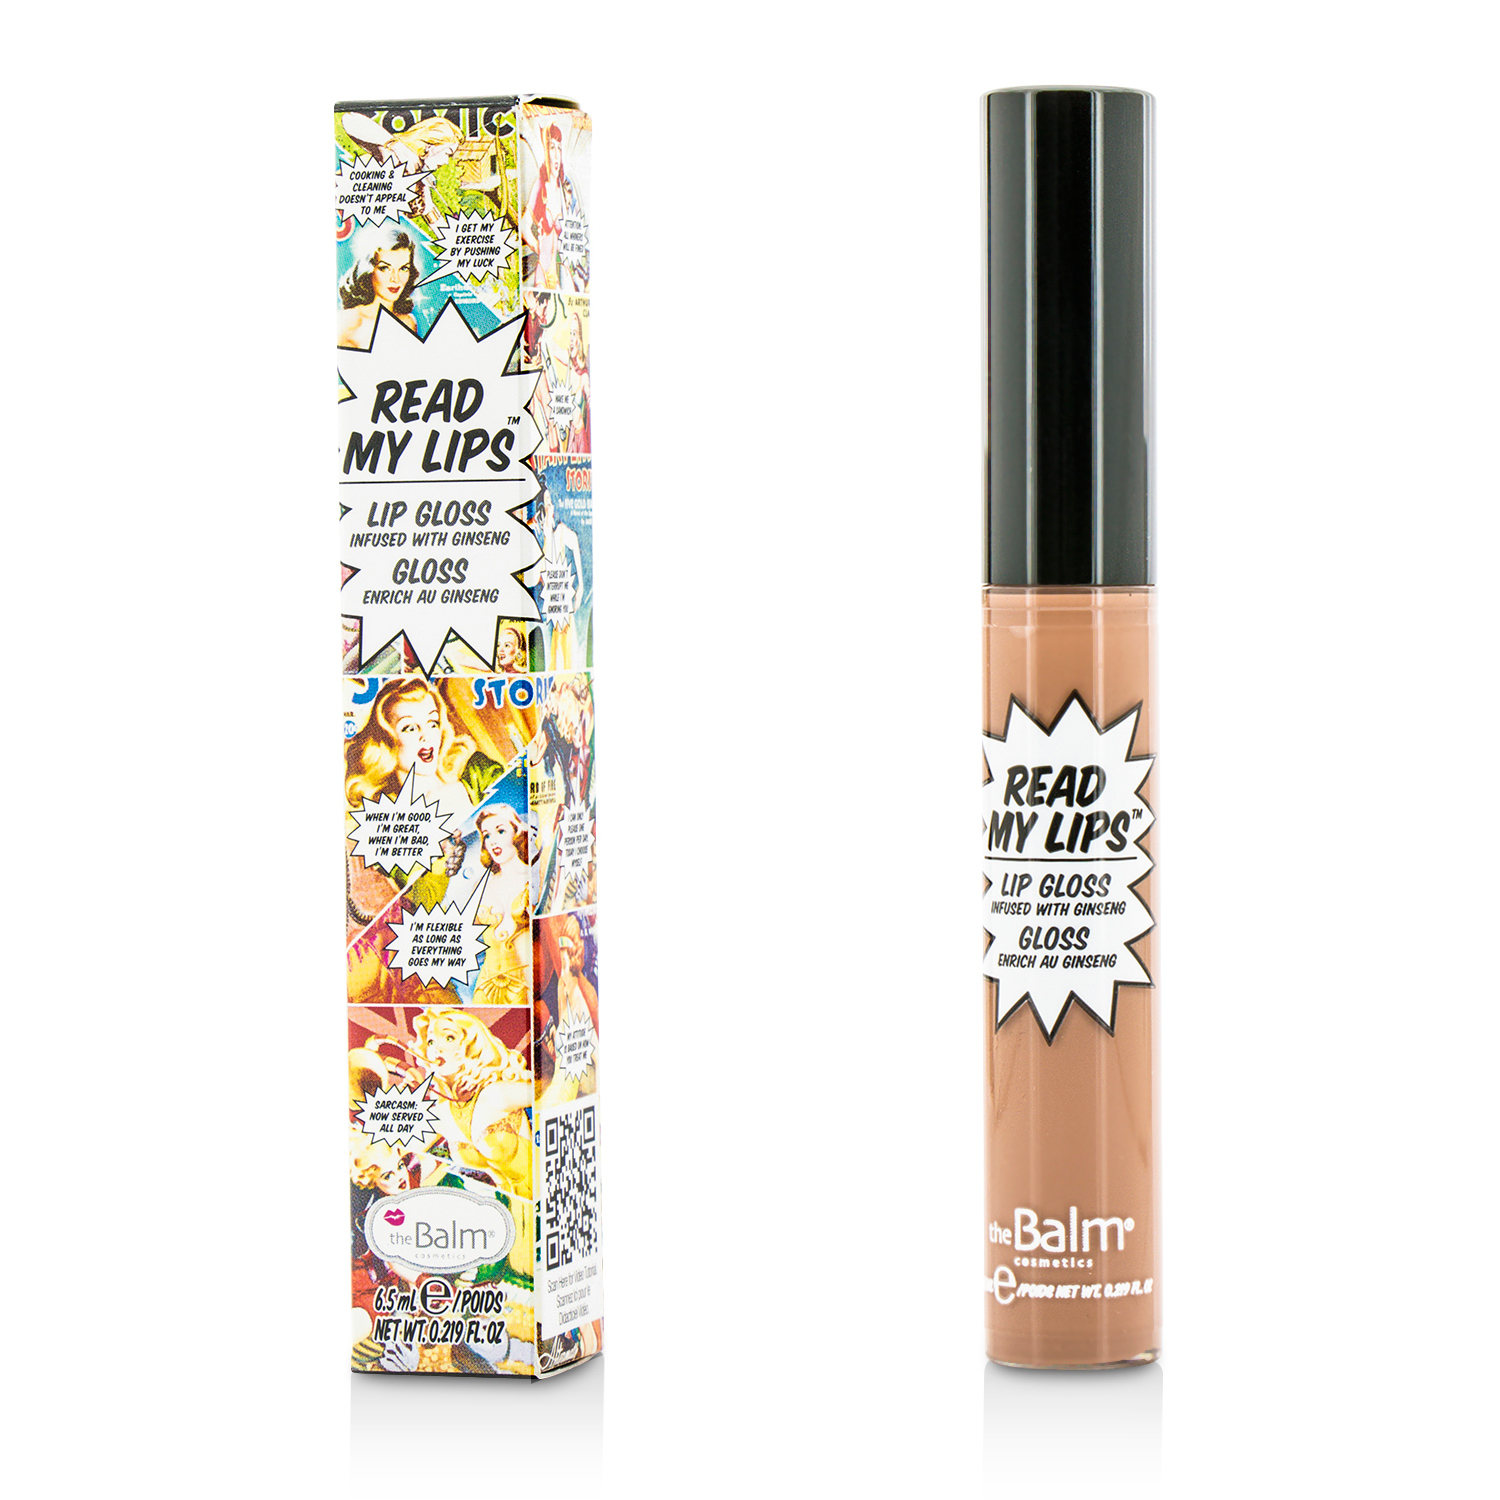 Read My Lips (Lip Gloss Infused With Ginseng) - #Snap! TheBalm Image